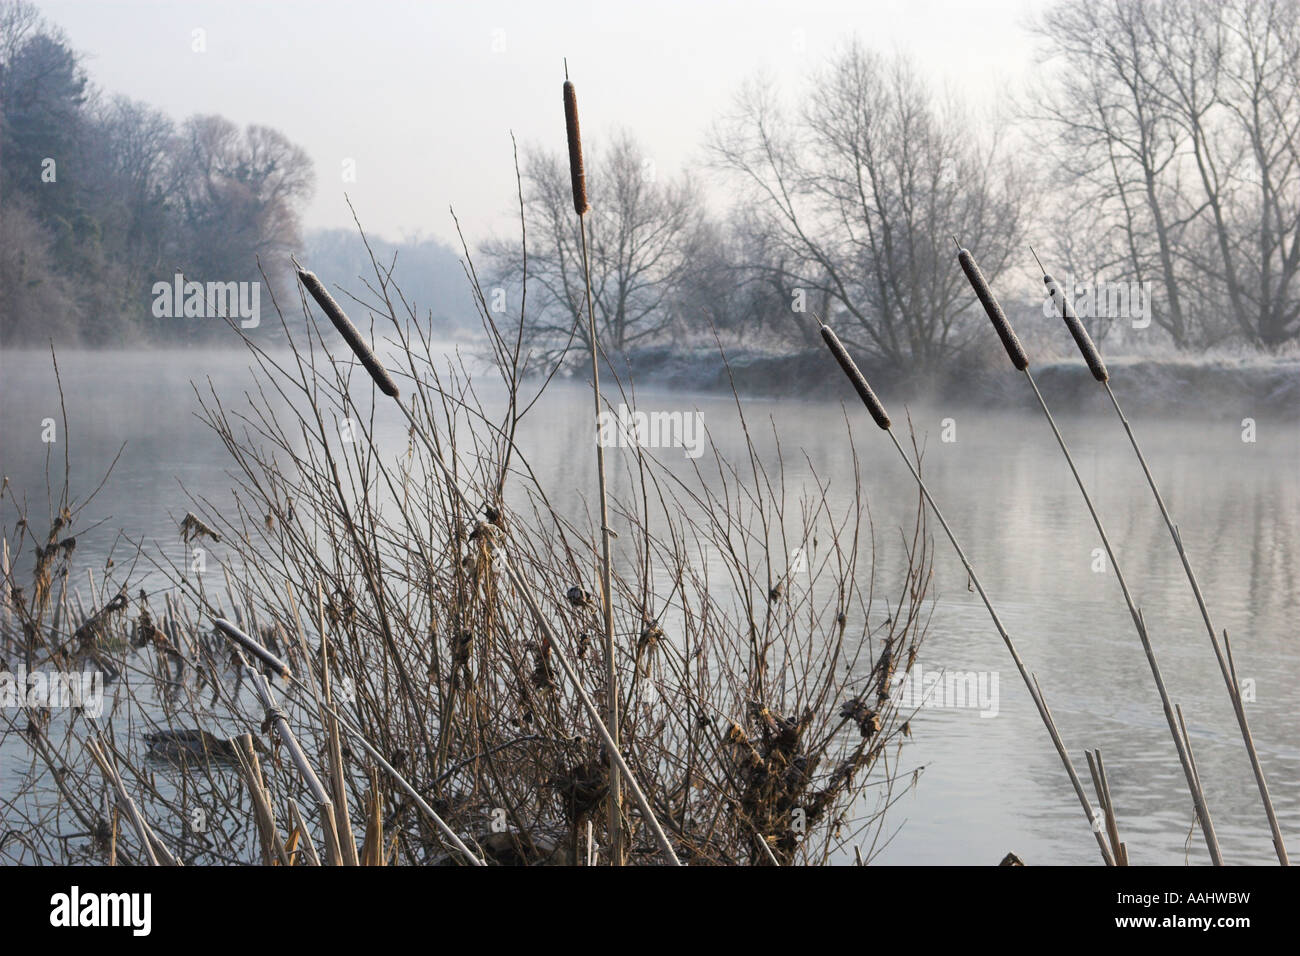 Bullrushes on the Thames at Clifton Hampden in an early misty morning in winter Stock Photo